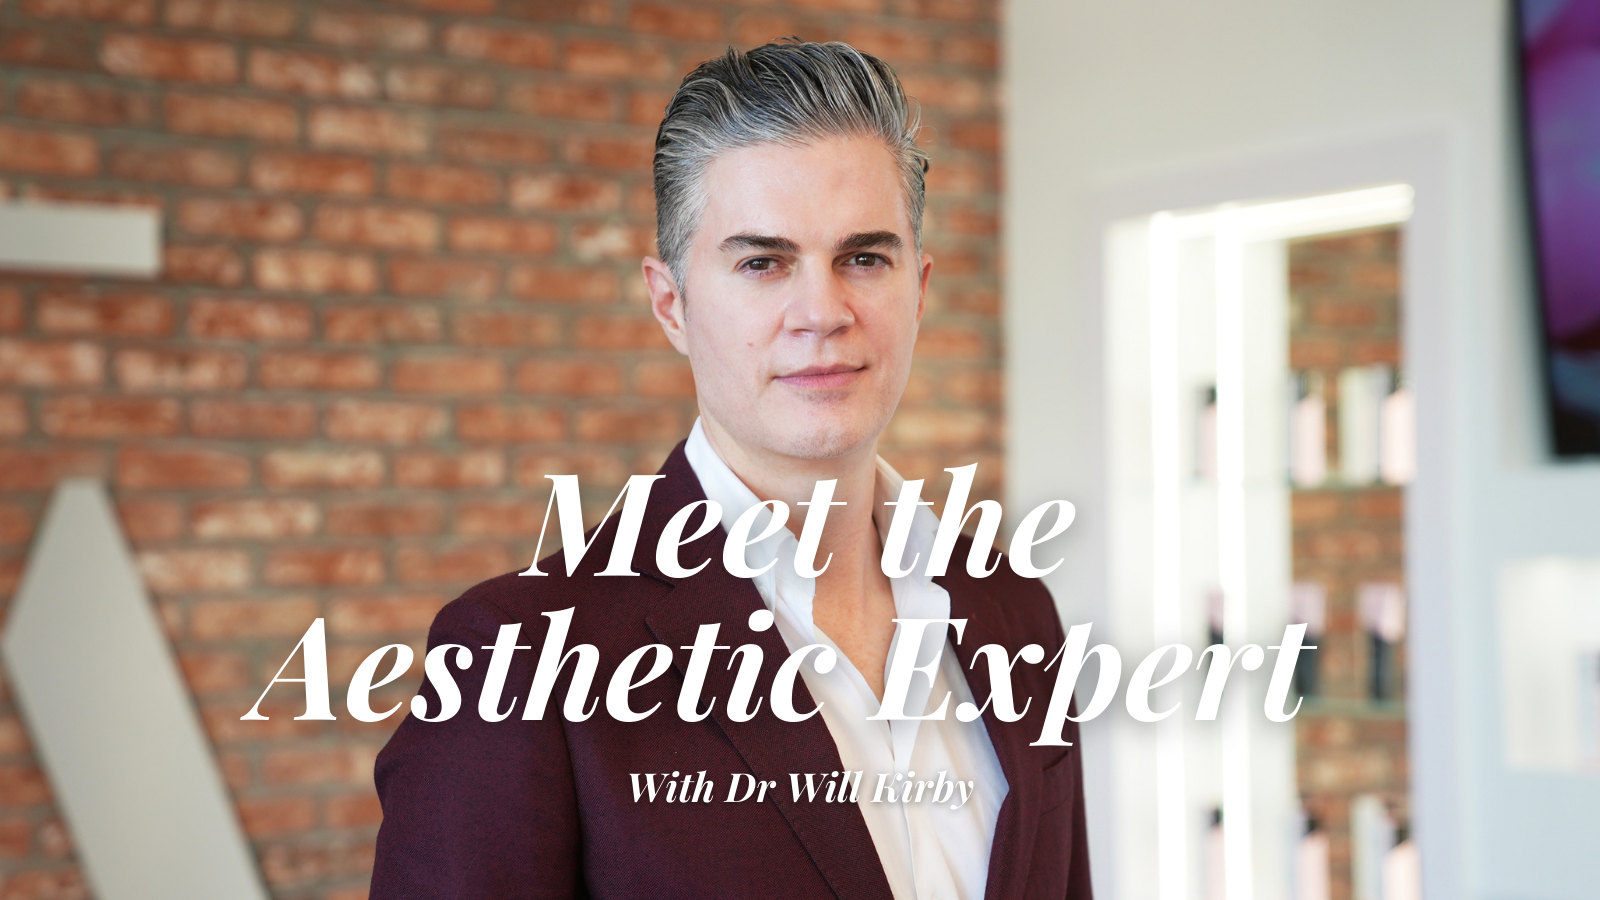 Meet the Aesthetic Expert with Dr Will Kirby: Edrice Simmons 